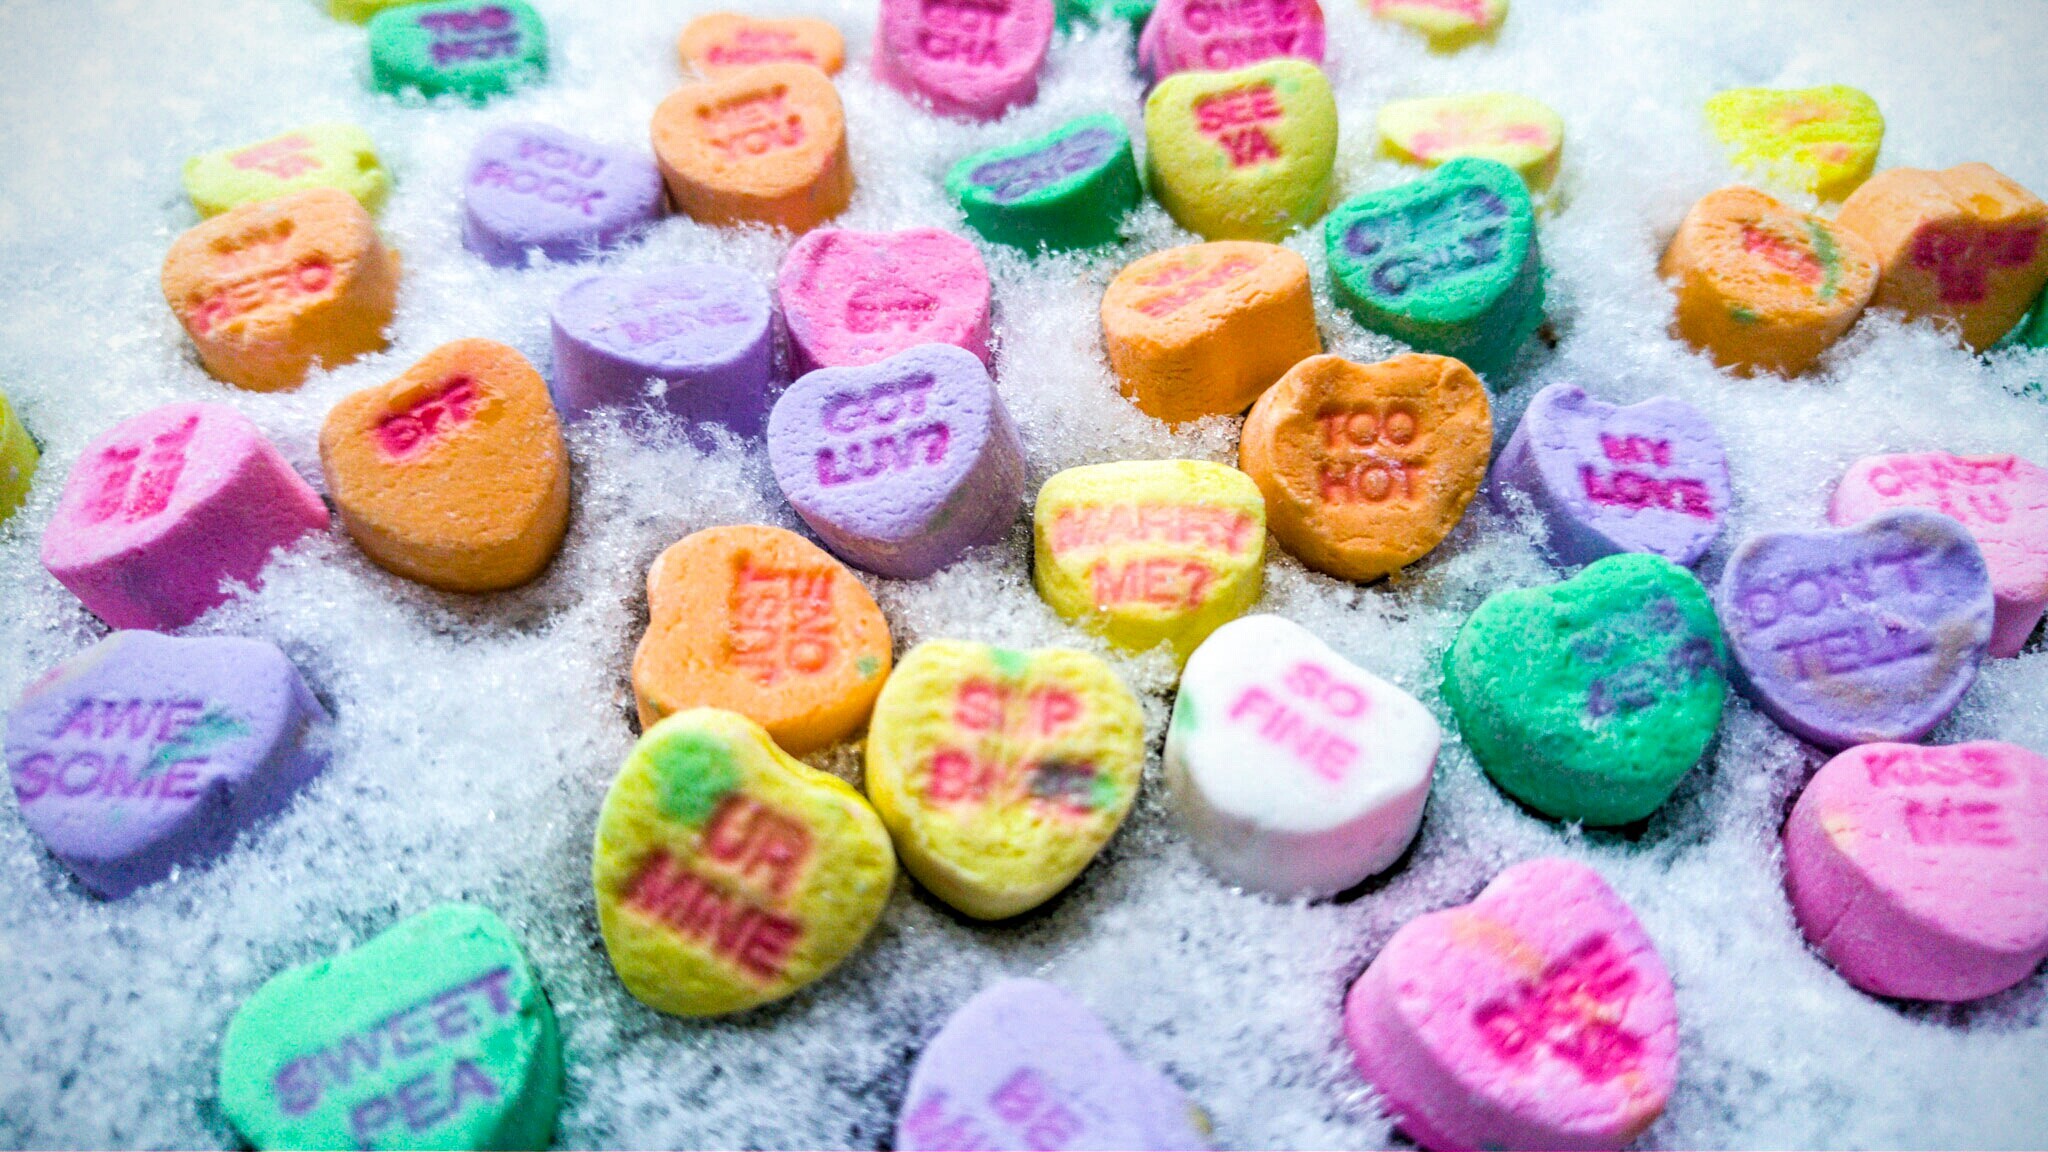 2048x1152 My earliest Valentine's candy heart memory is from elementary school. In  second grade I spent hours carefully selecting individual conversation  hearts with ...